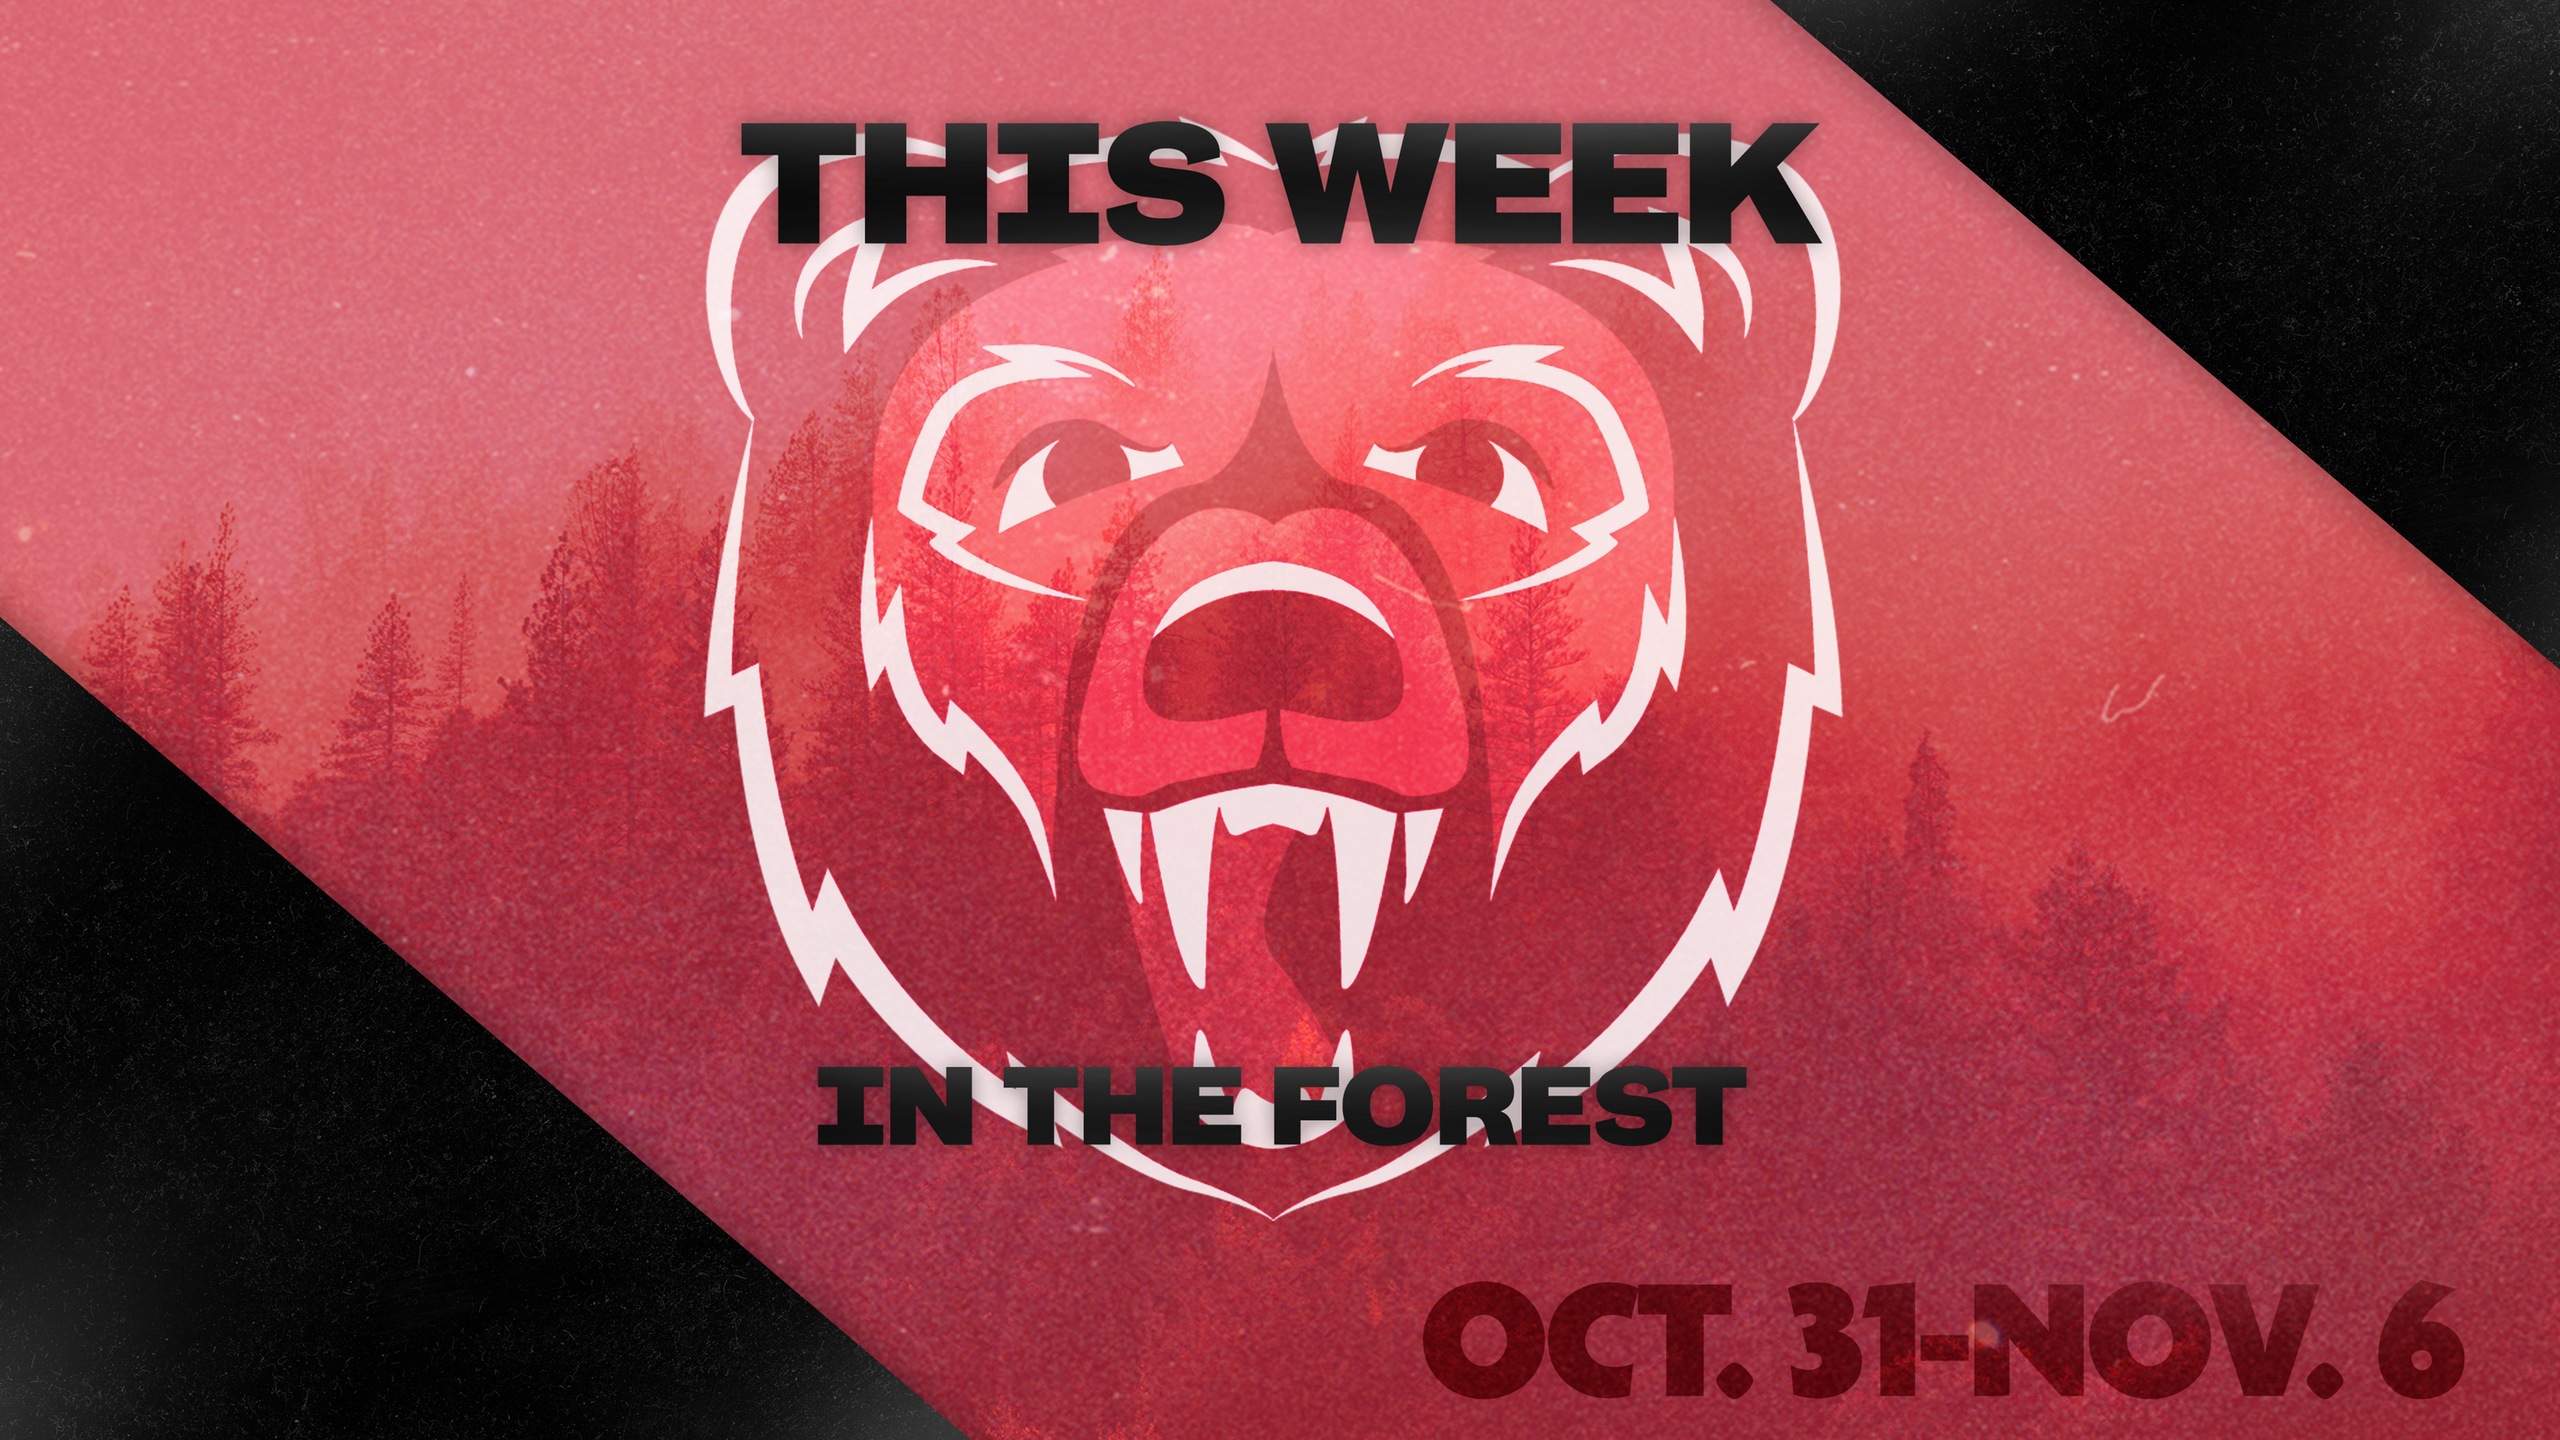 This Week in The Forest Oct.31-Nov.6